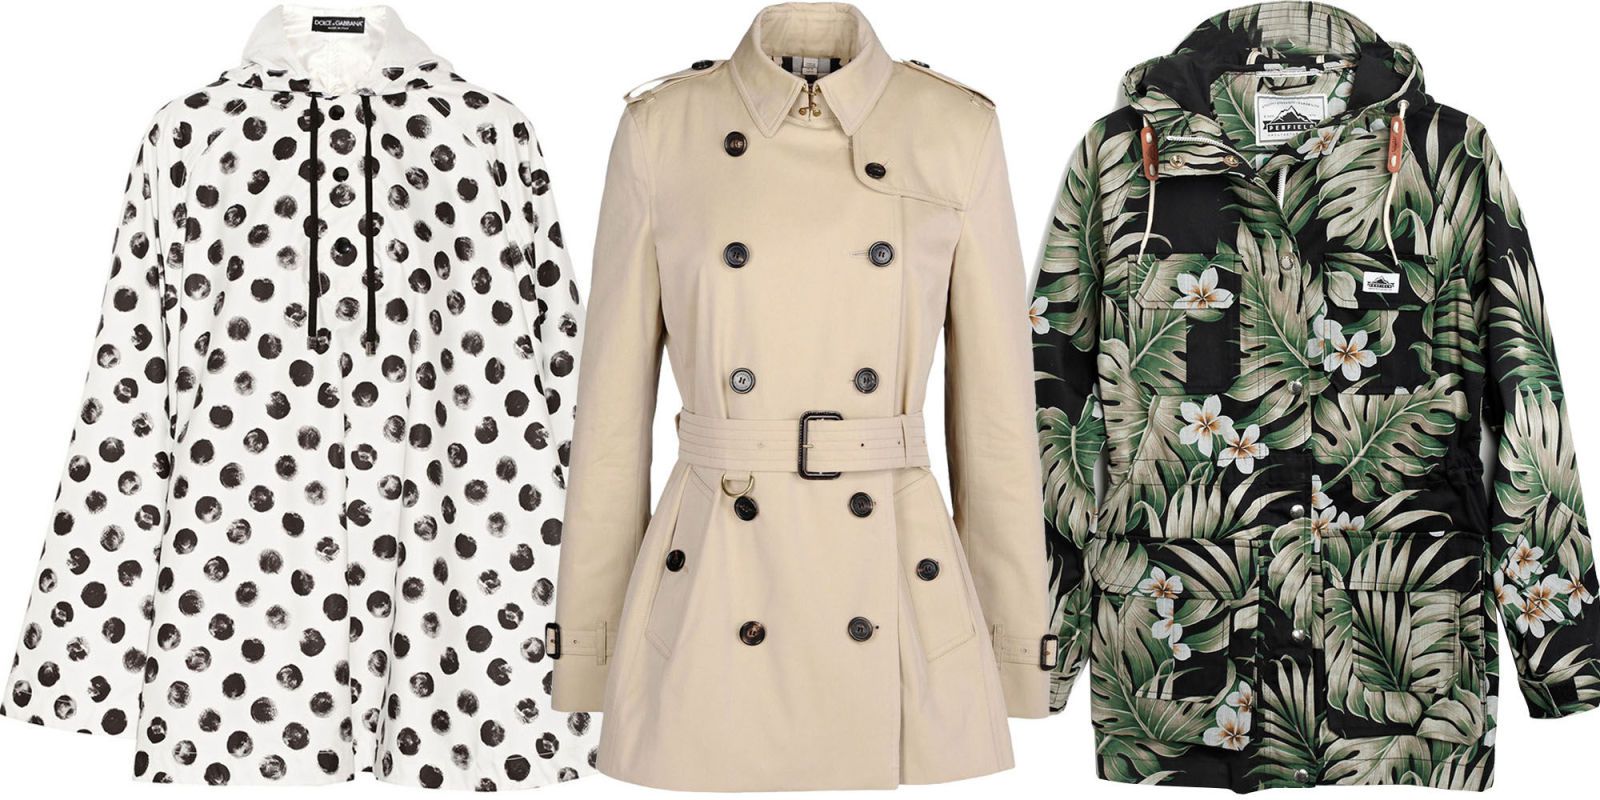 10 Best Raincoats for Spring - Chic Rain Ponchos and Jackets